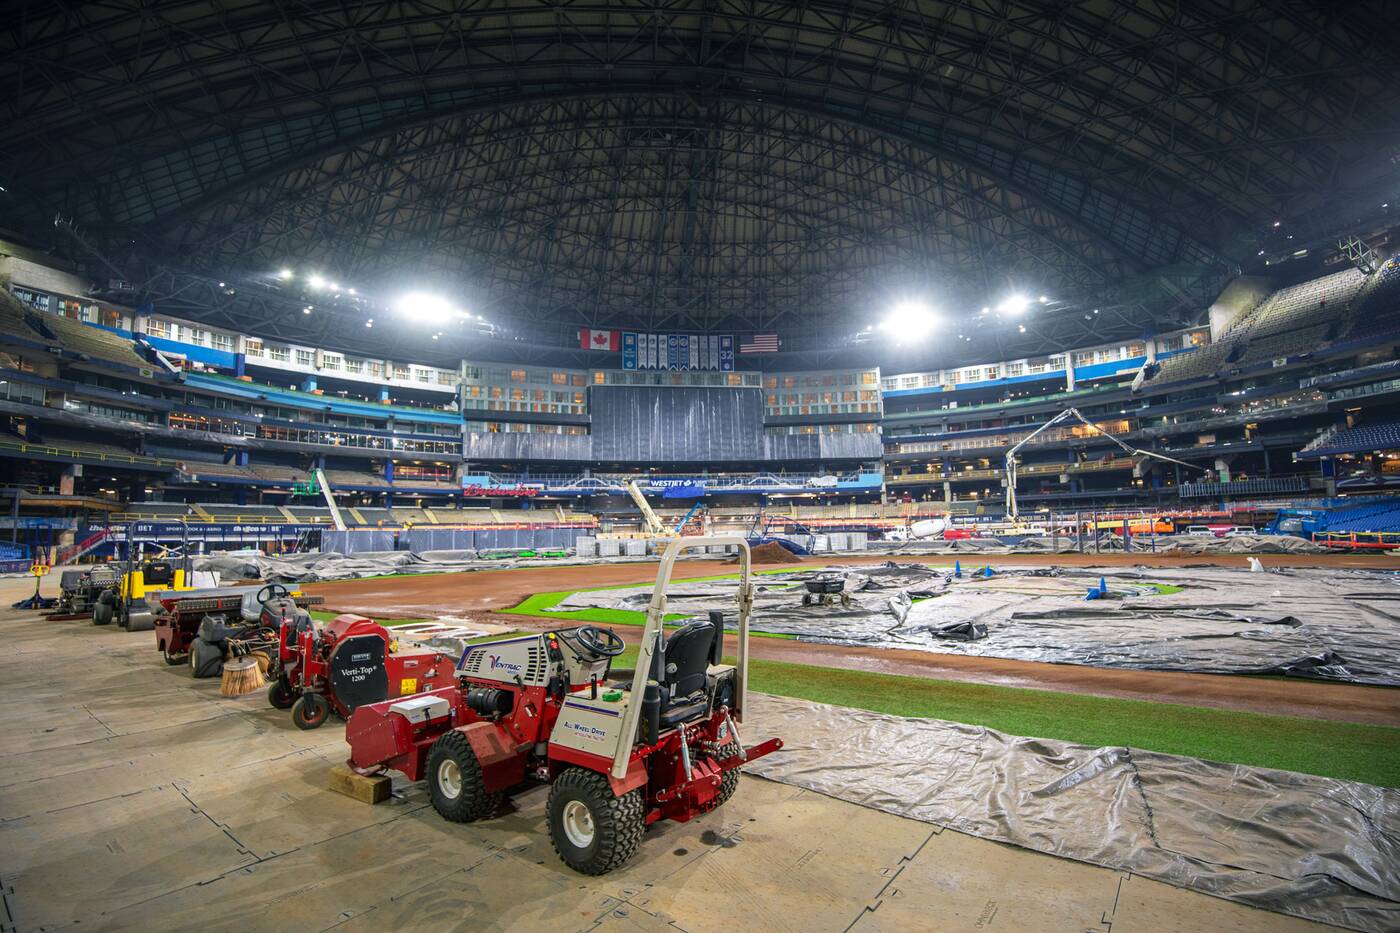 Rogers Centre, before and after phase 1 of the >$300M renovations : r/ baseball